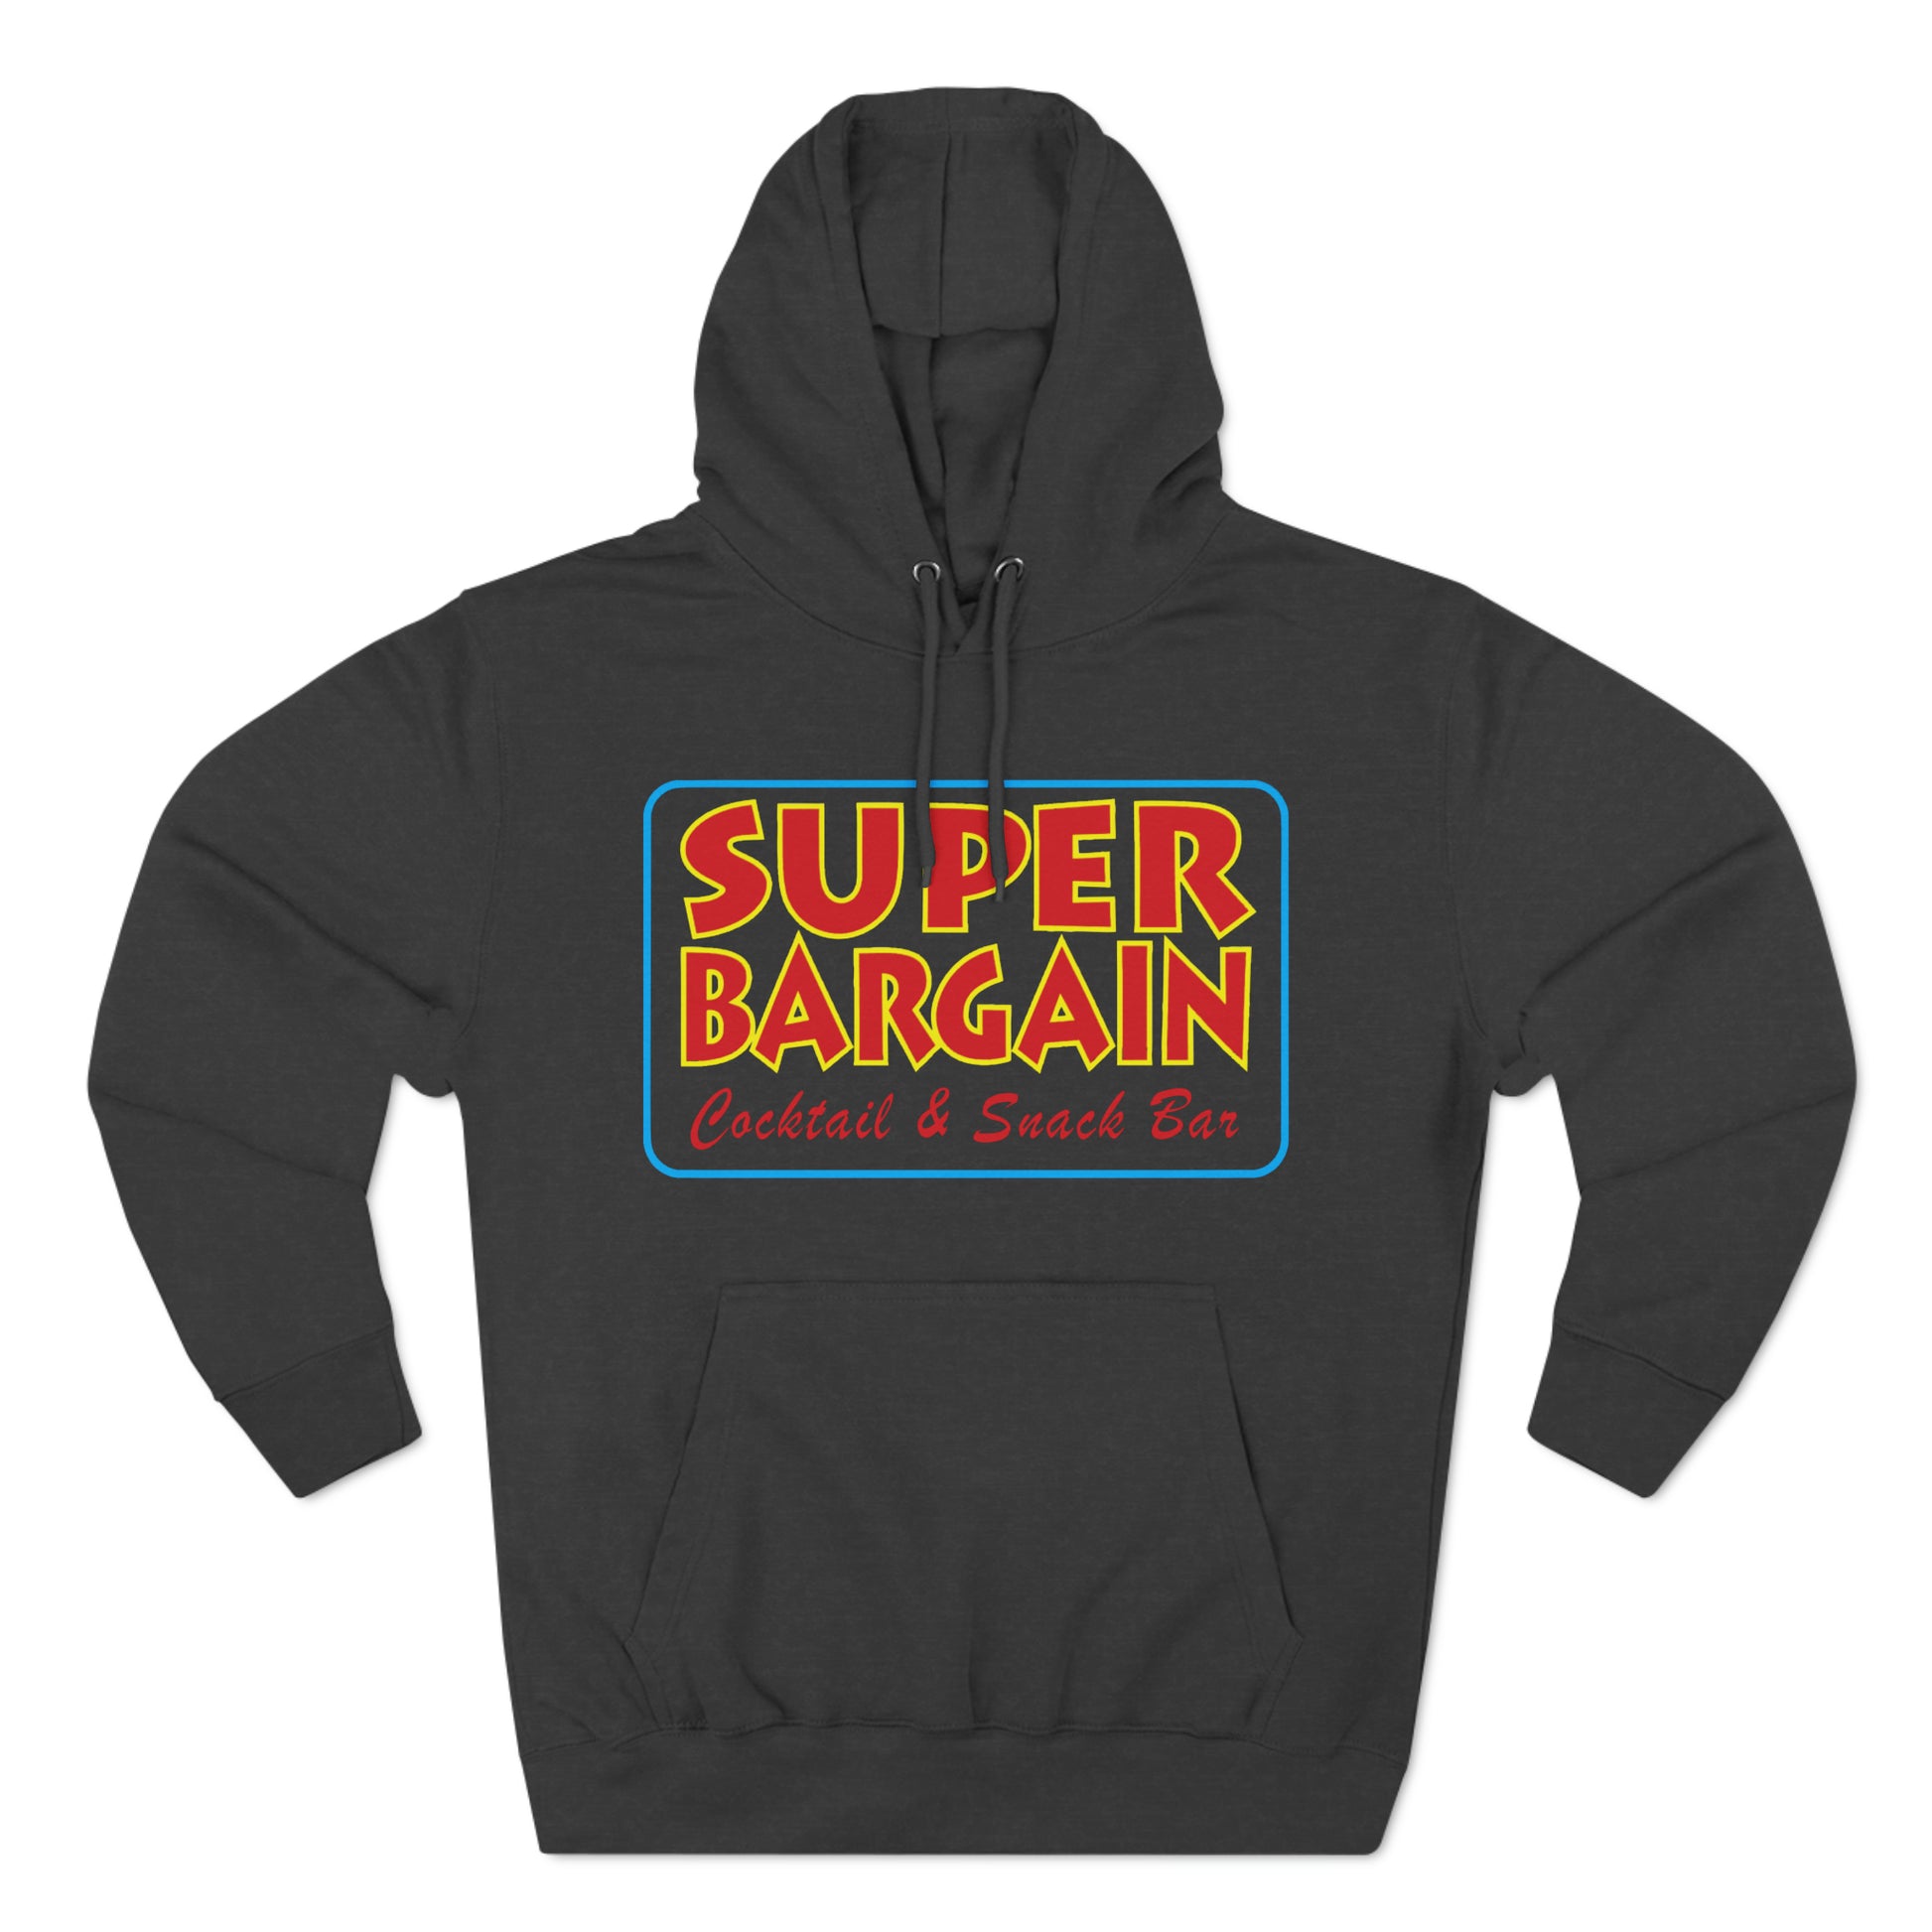 A black Unisex Premium Pullover Hoodie featuring a colorful retro-style logo saying "SUPER BARGAIN Cocktail & Snack Bar" on the front, displayed against a plain background, reminiscent of Toronto's Cabbagetown vibe by Printify.